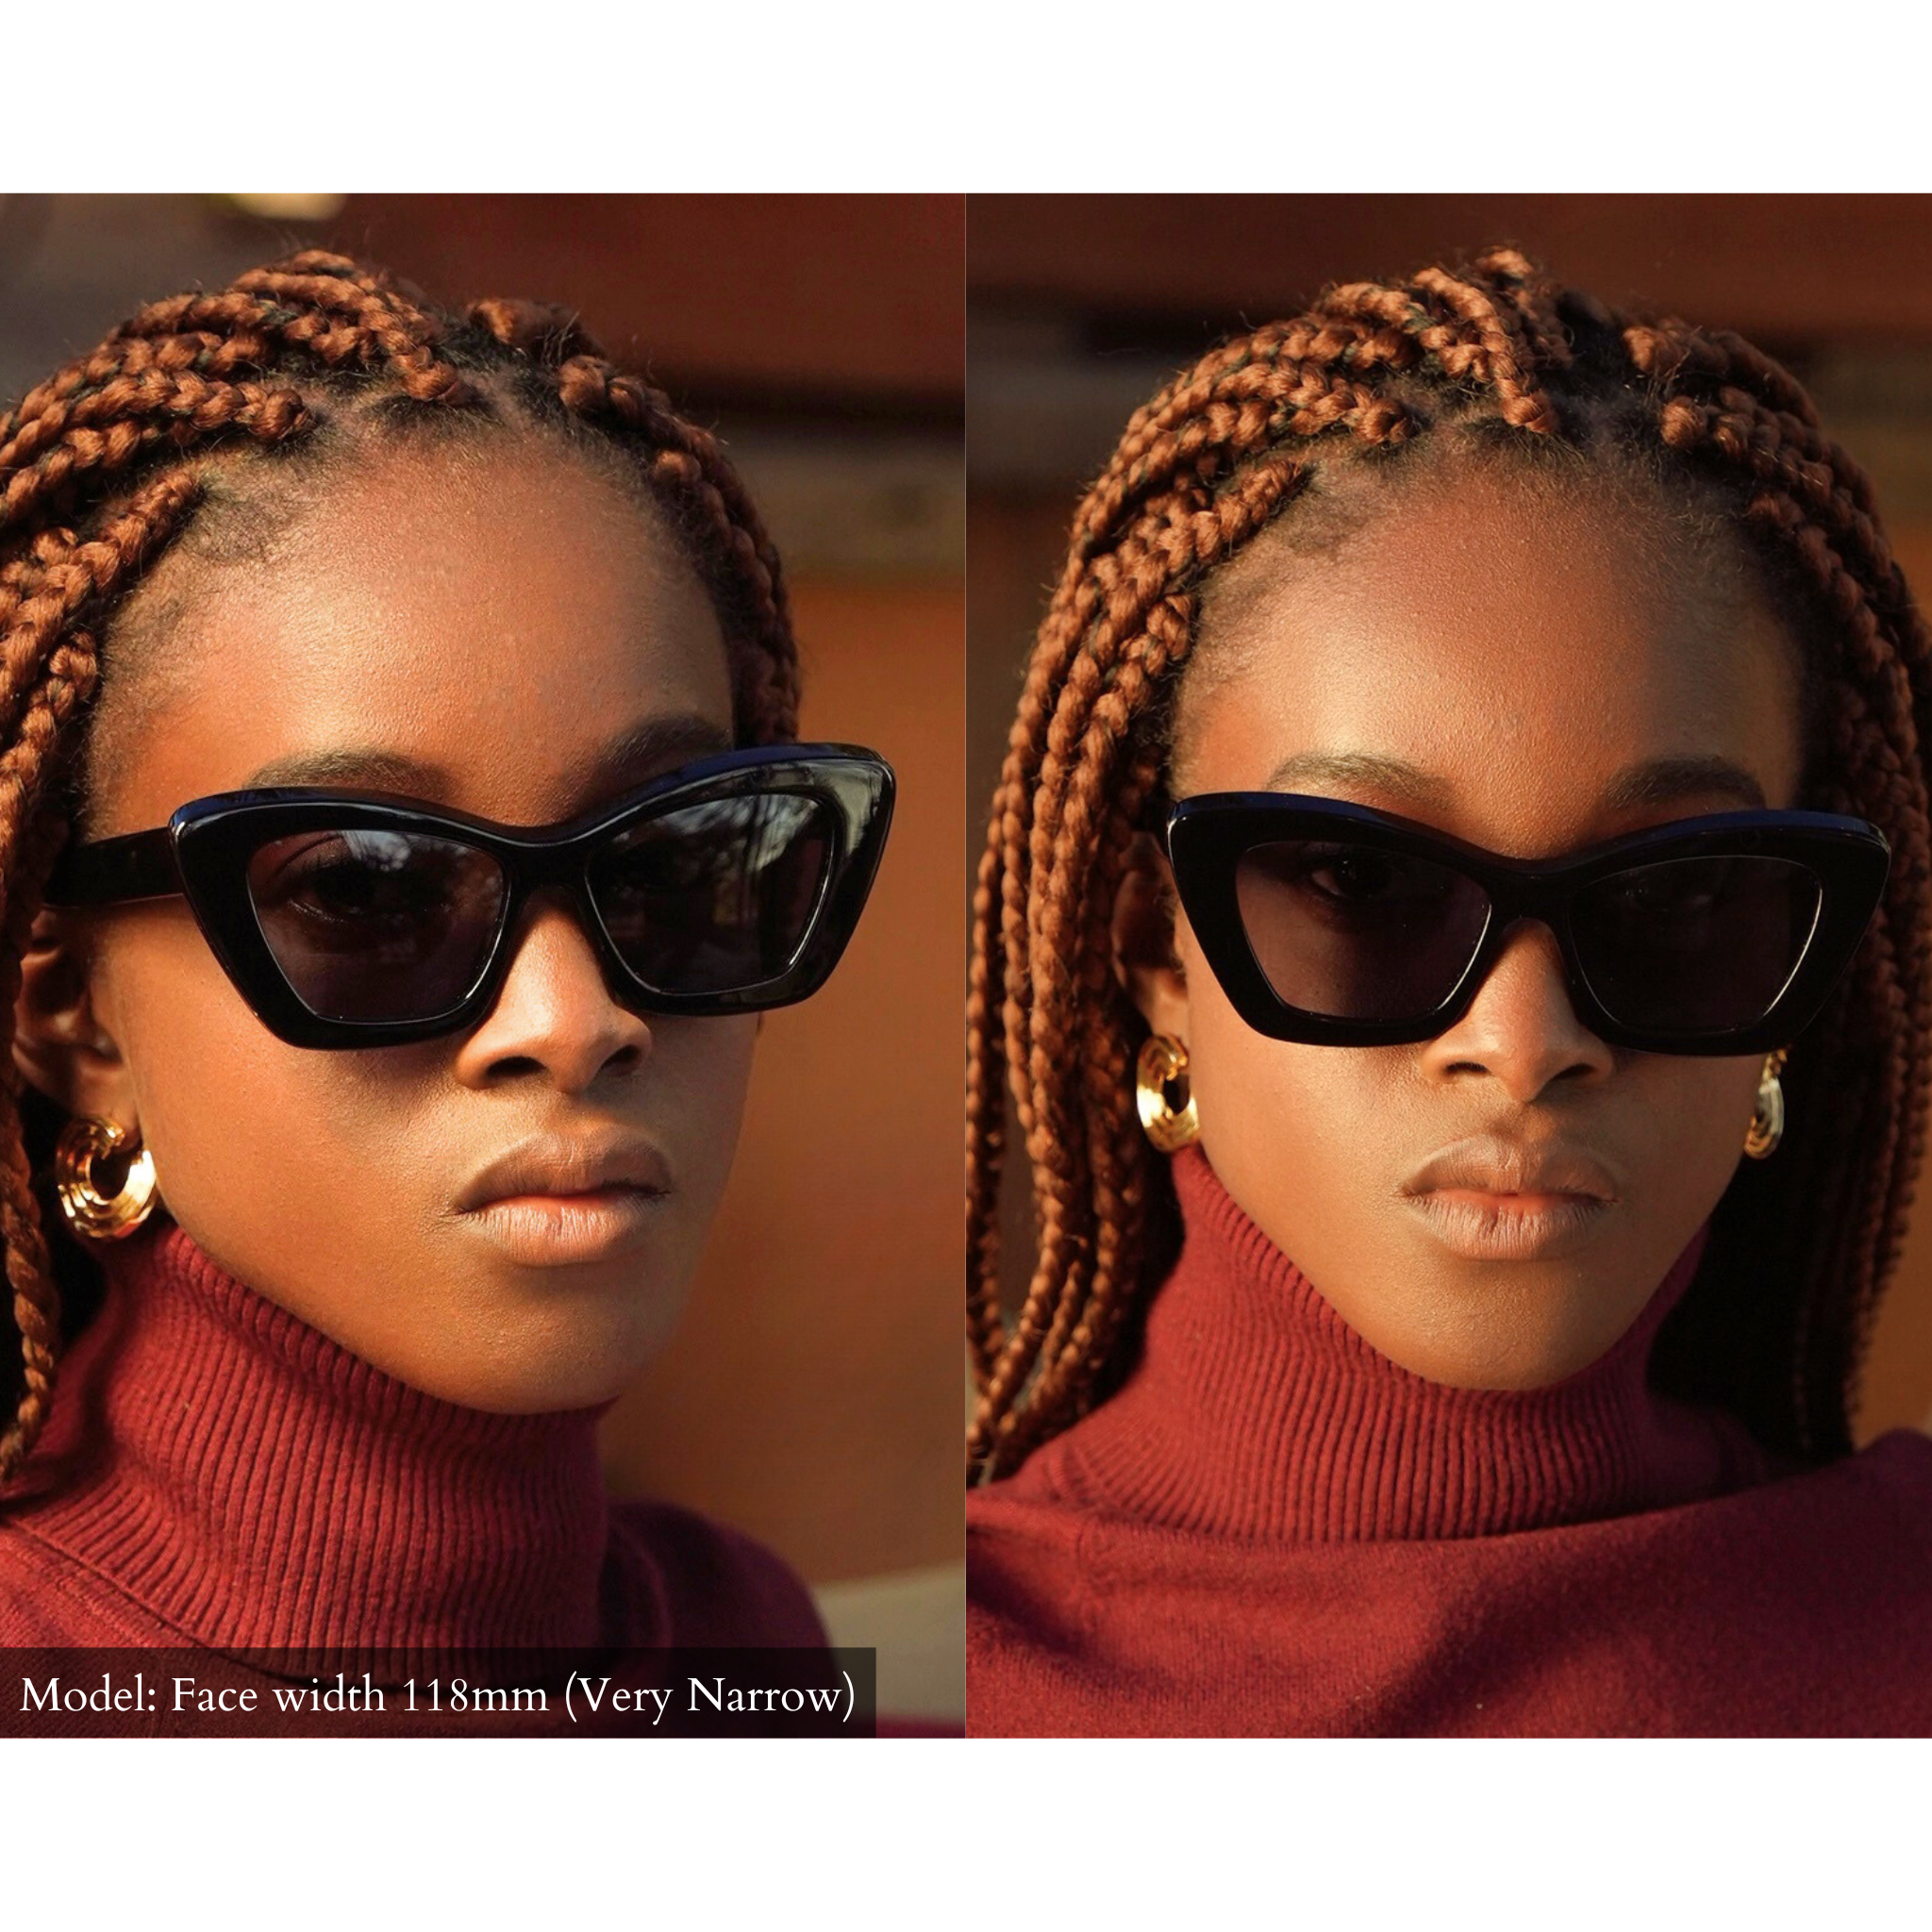 Model with very narrow face wearing black cat eye sunglasses in size small from 2 angles